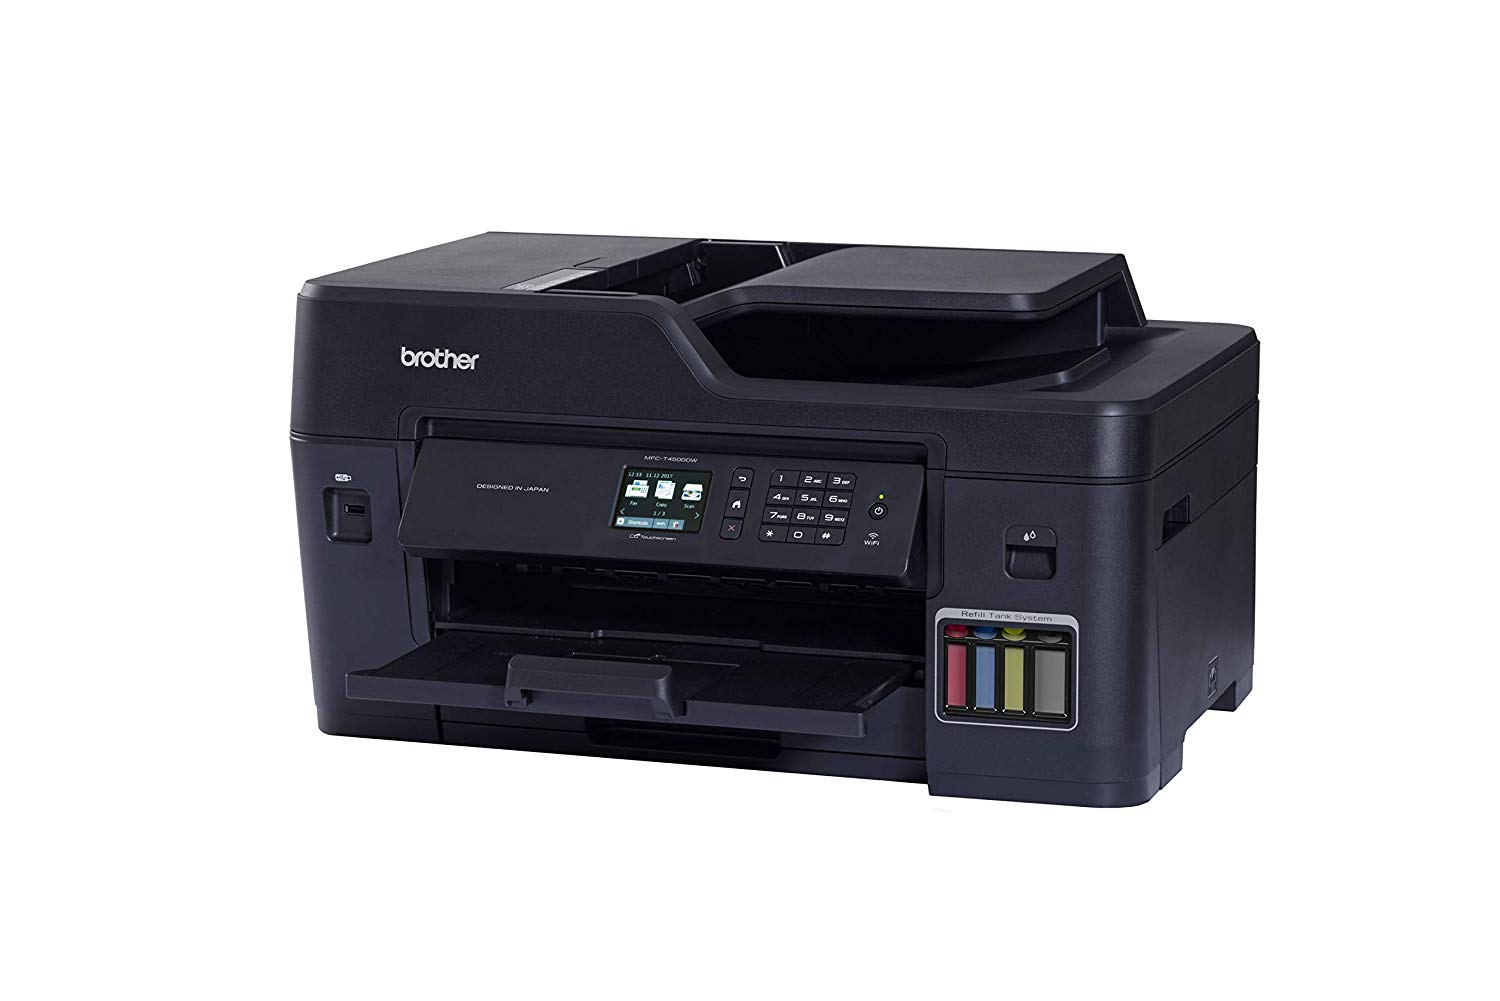 Brother Ink Tank Multi-Function Printer MFC-T4500DW A3 Print, Scan, Copy, Fax with Duplex, Wi-fi/Network & 50 Sheets ADF